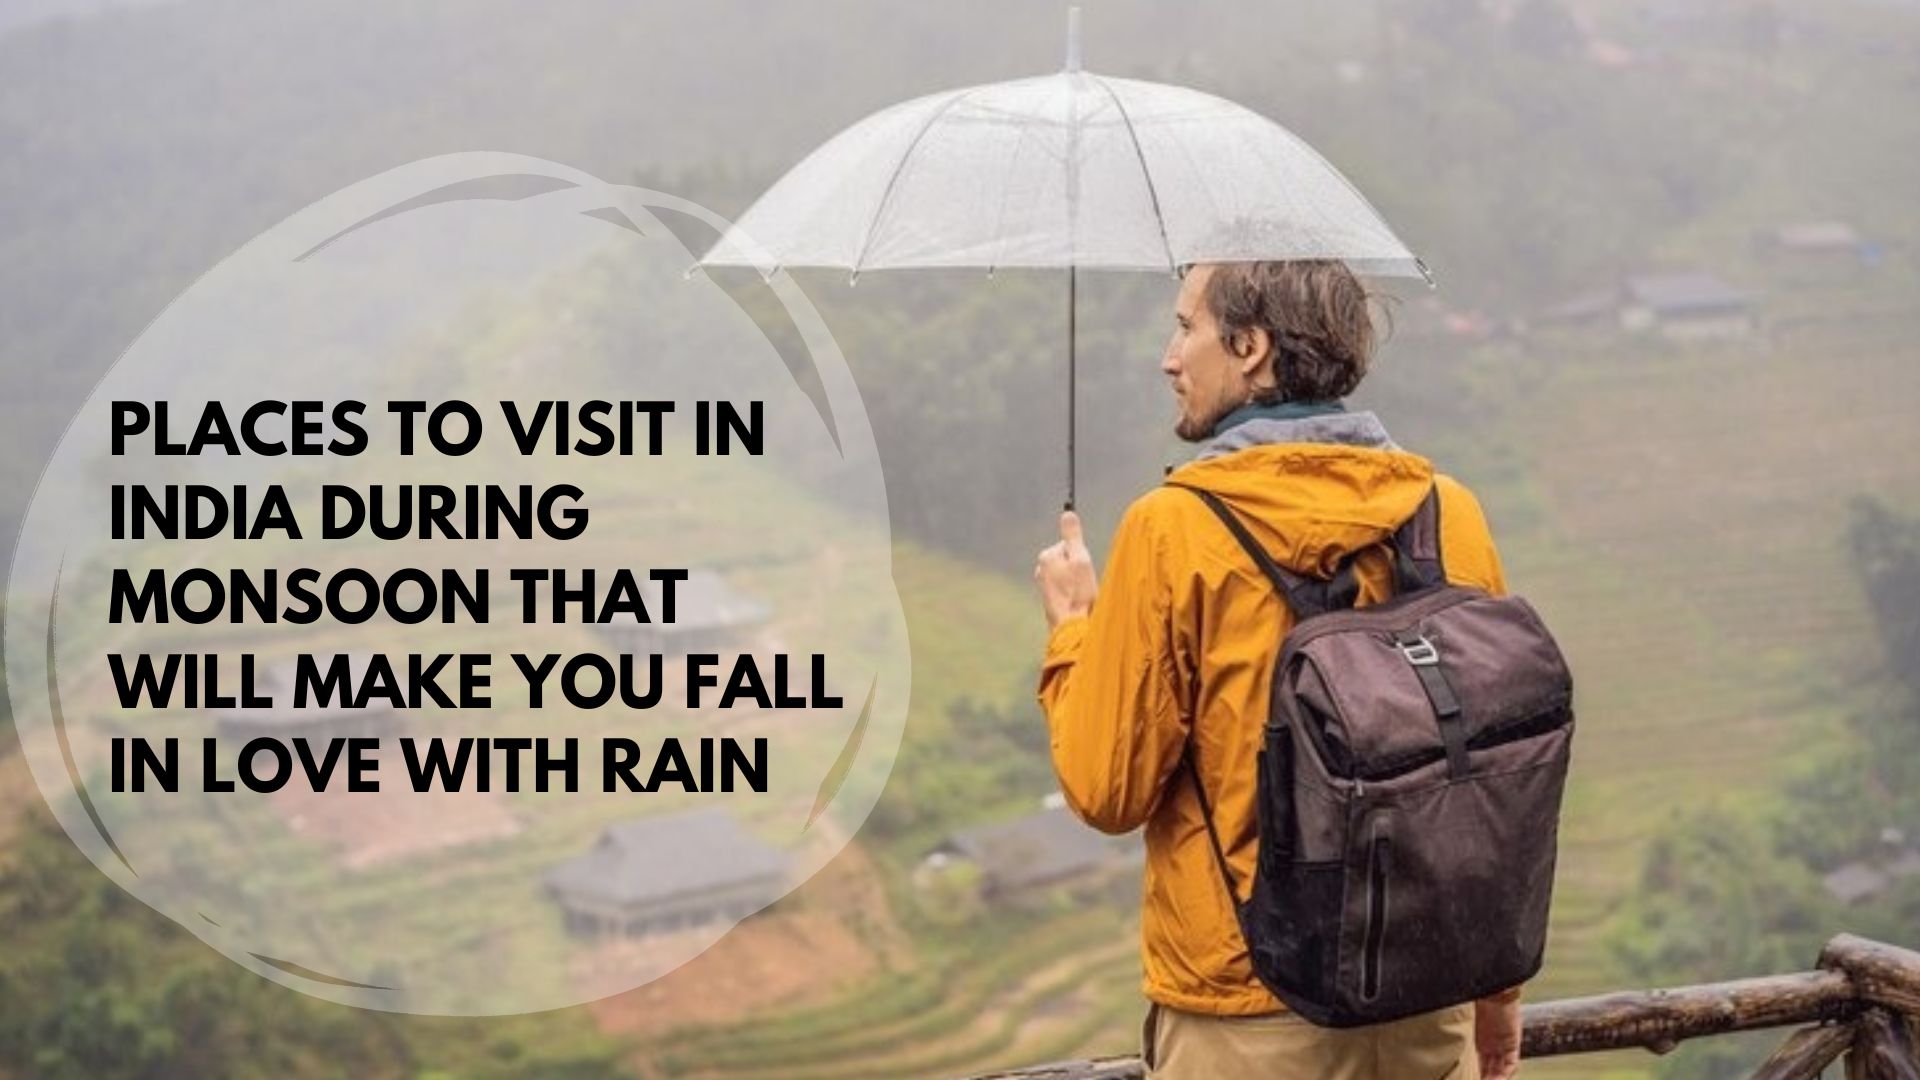 Places To Visit in India During Monsoon That Will Make You Fall In Love With Rain